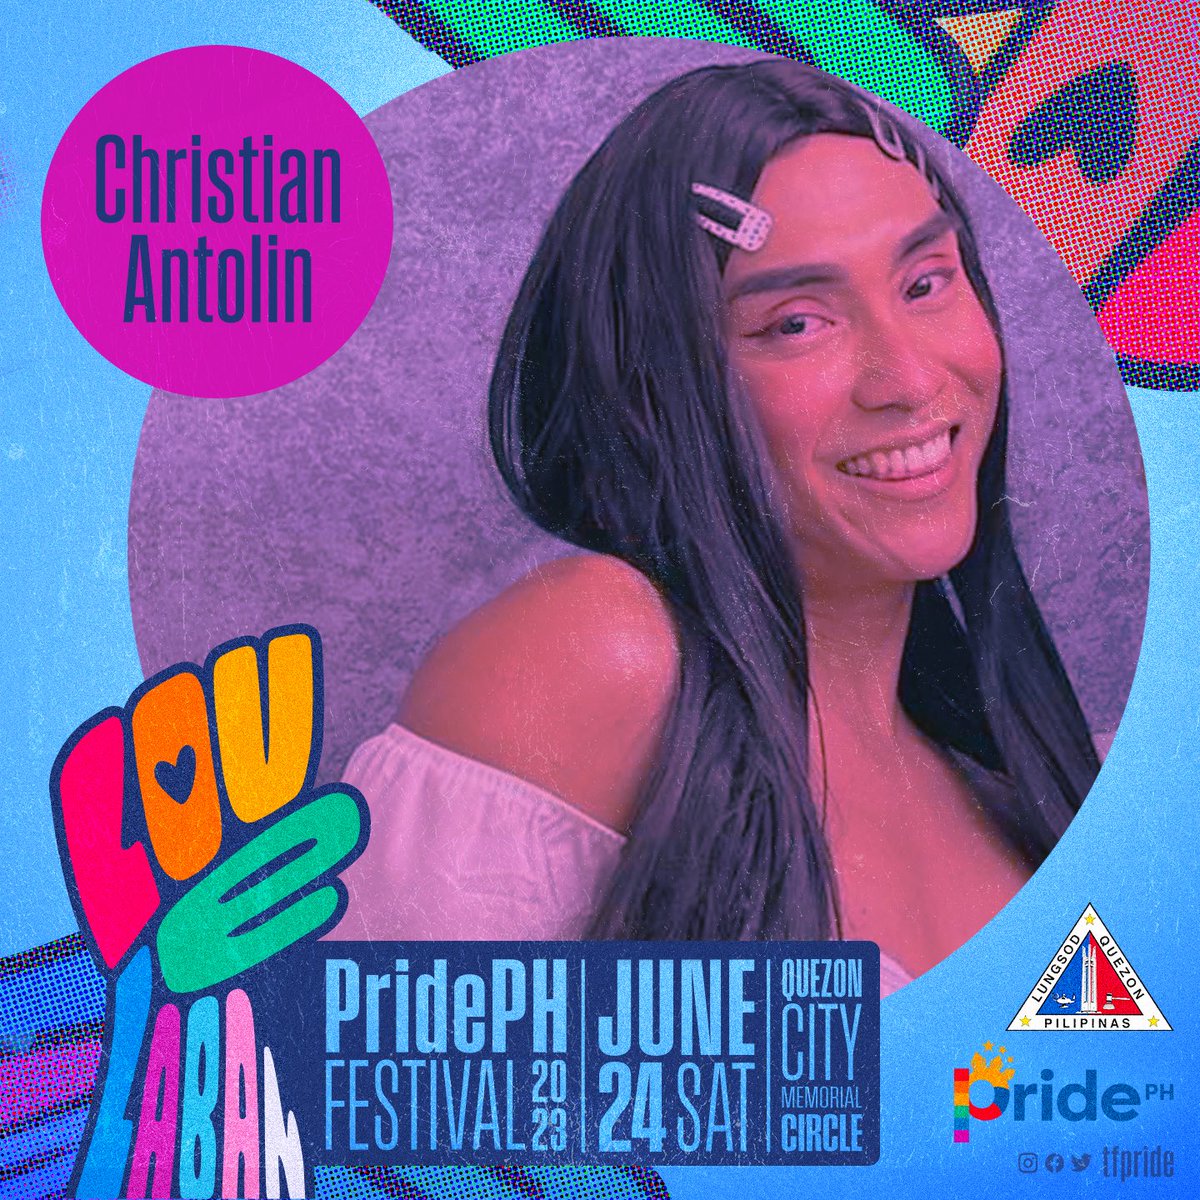 And rounding up today’s announcement of our INITIAL line up! Pak!

Drei Arias @DreiArias
Femme MNL
TFX
Christian Antolin

LOVE LABAN
PridePH Feastival 2023
June 24, 2023, QC Memorial Circle
10AM - 12MN
Spearheaded by Quezon City Government and #PridePH
#LoveLaban #OnePride